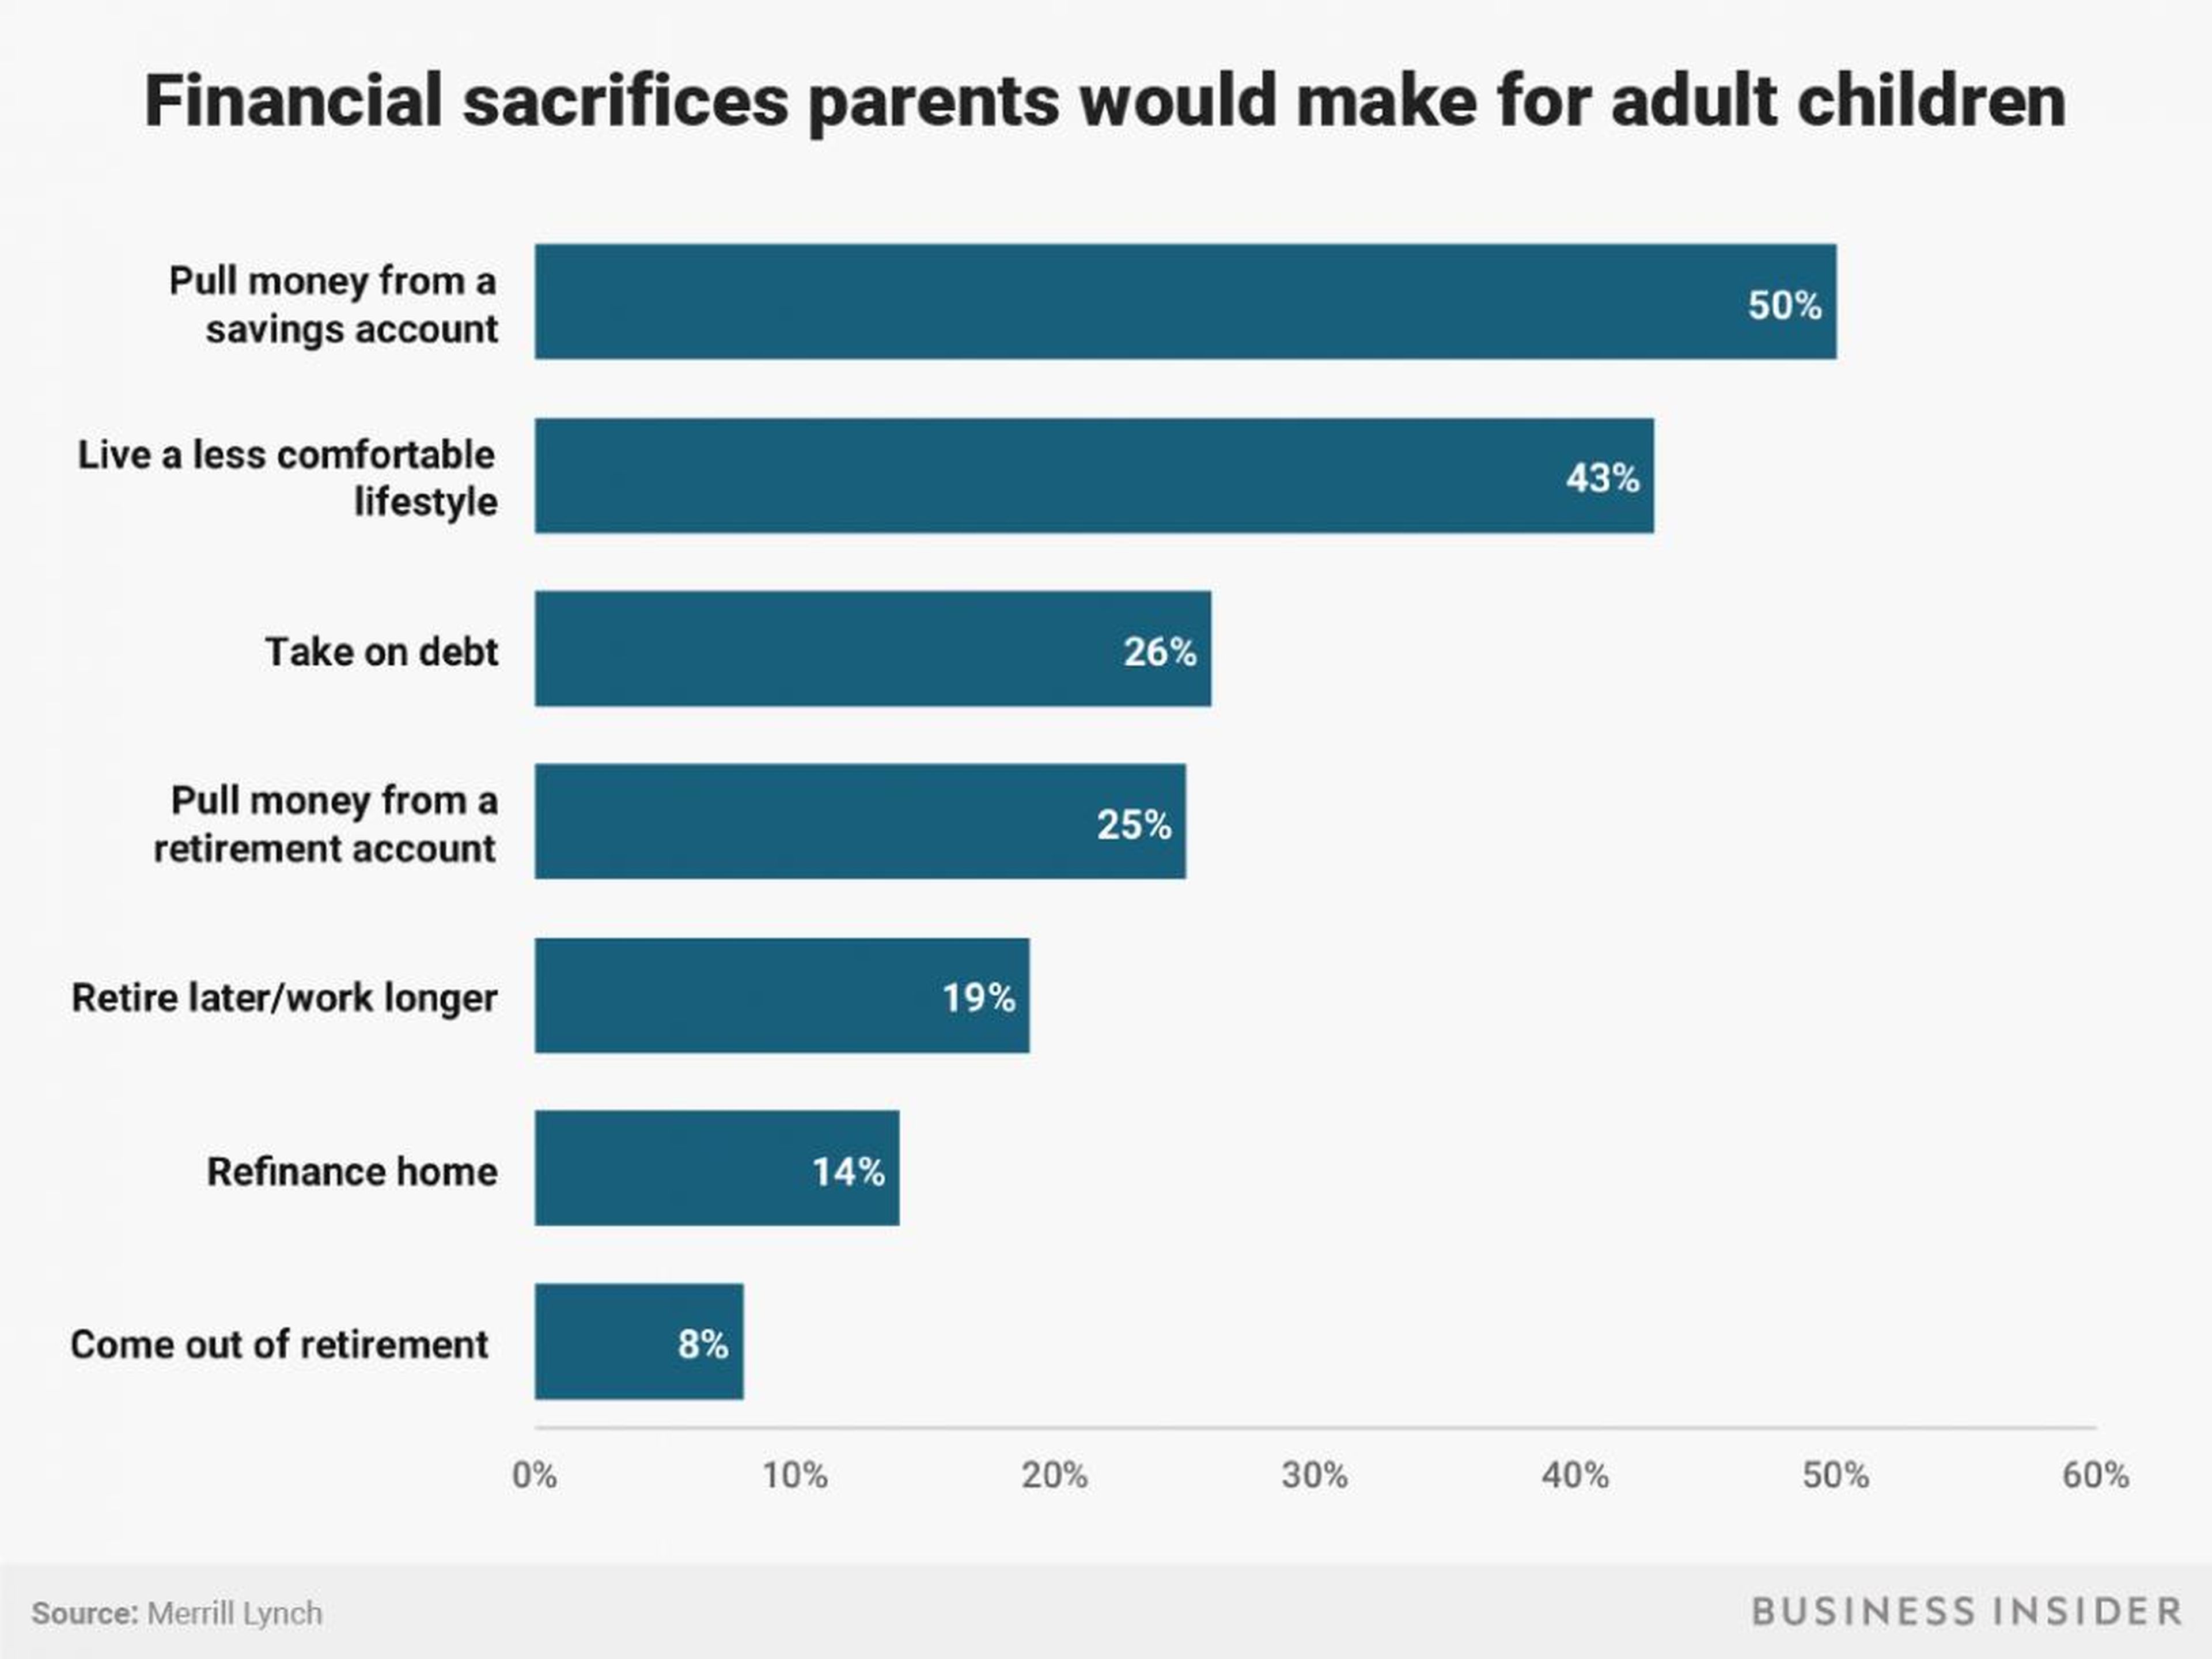 Many parents surveyed would make various financial sacrifices for their adult children.